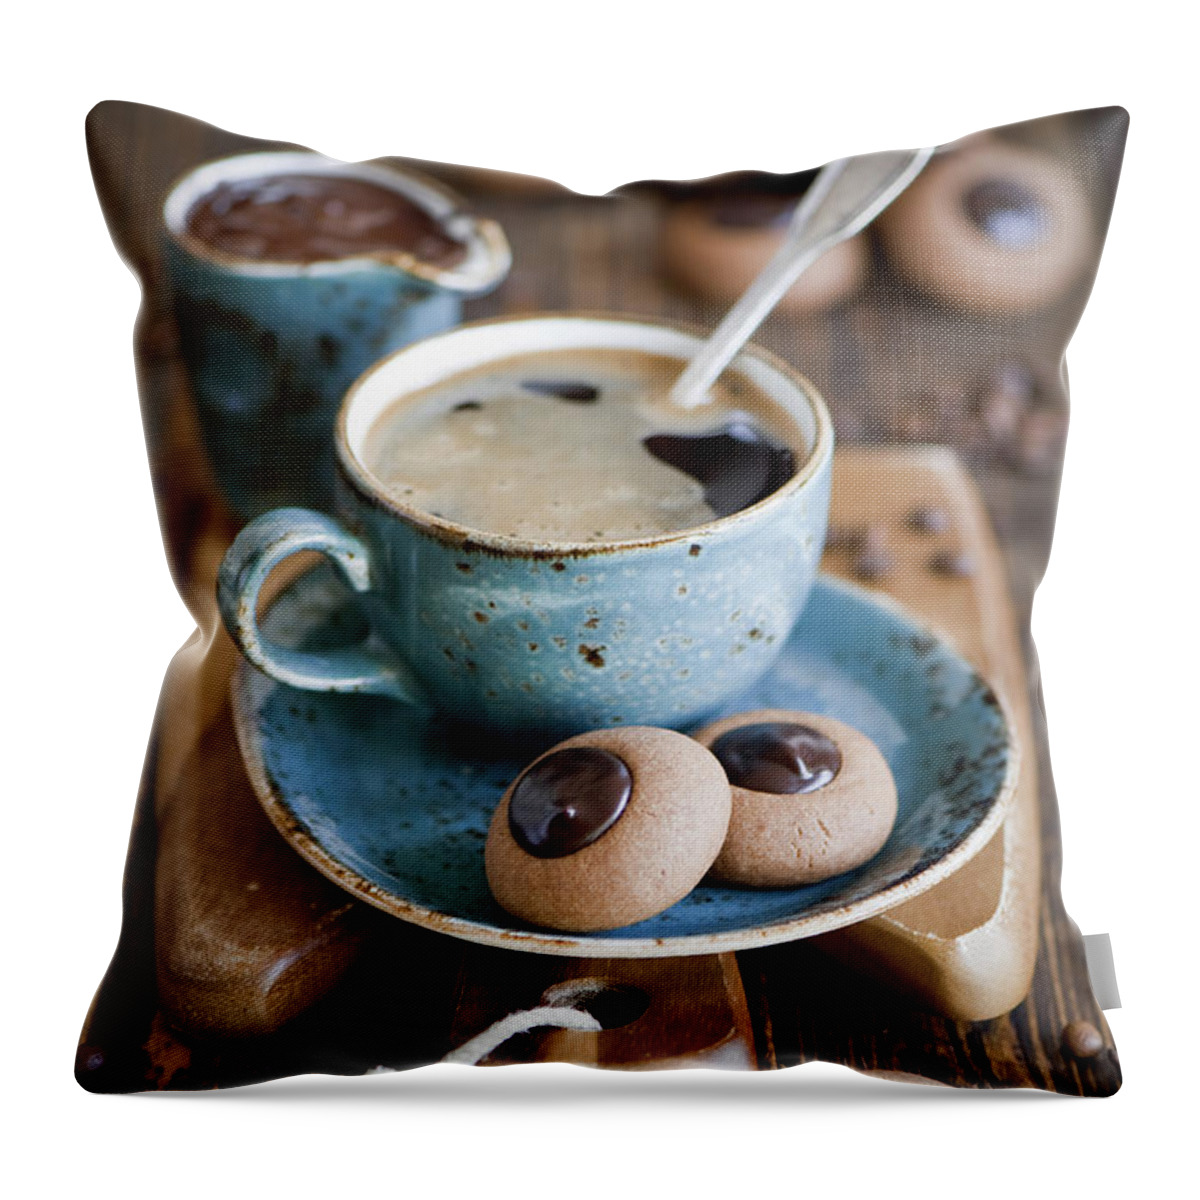 Breakfast Throw Pillow featuring the photograph Chocolate Cookies #1 by Verdina Anna